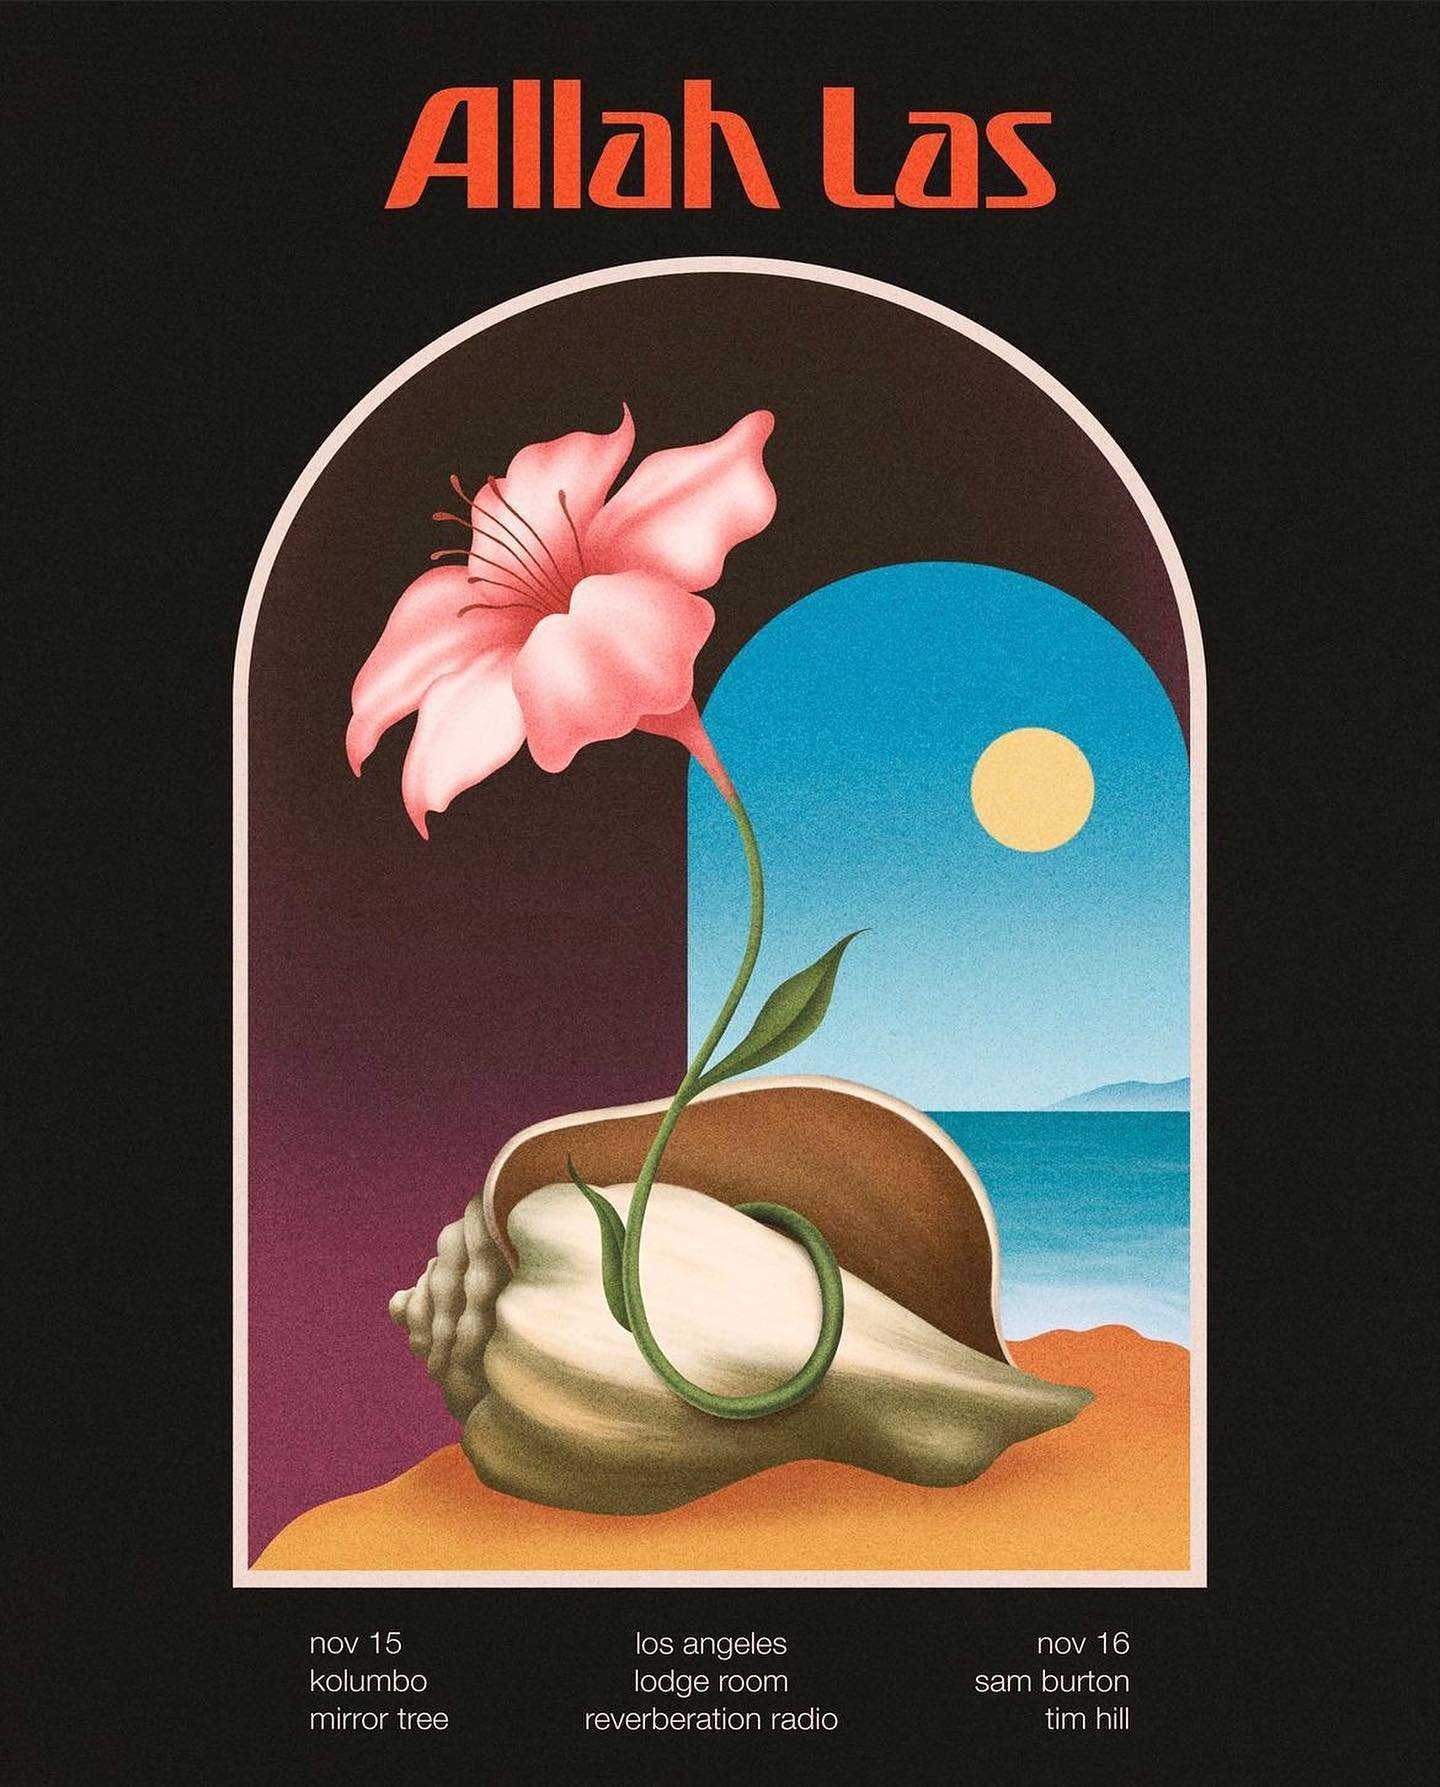 Seashell sounds this Nov 15th as Kolumbo returns to @lodgeroom in LA alongside @allahlas &amp; @mirror.tree Get your tickets soon cuz this is gonna sell out. 

Also this sweet flyer made by @andrepoiseone 

🐚🎹